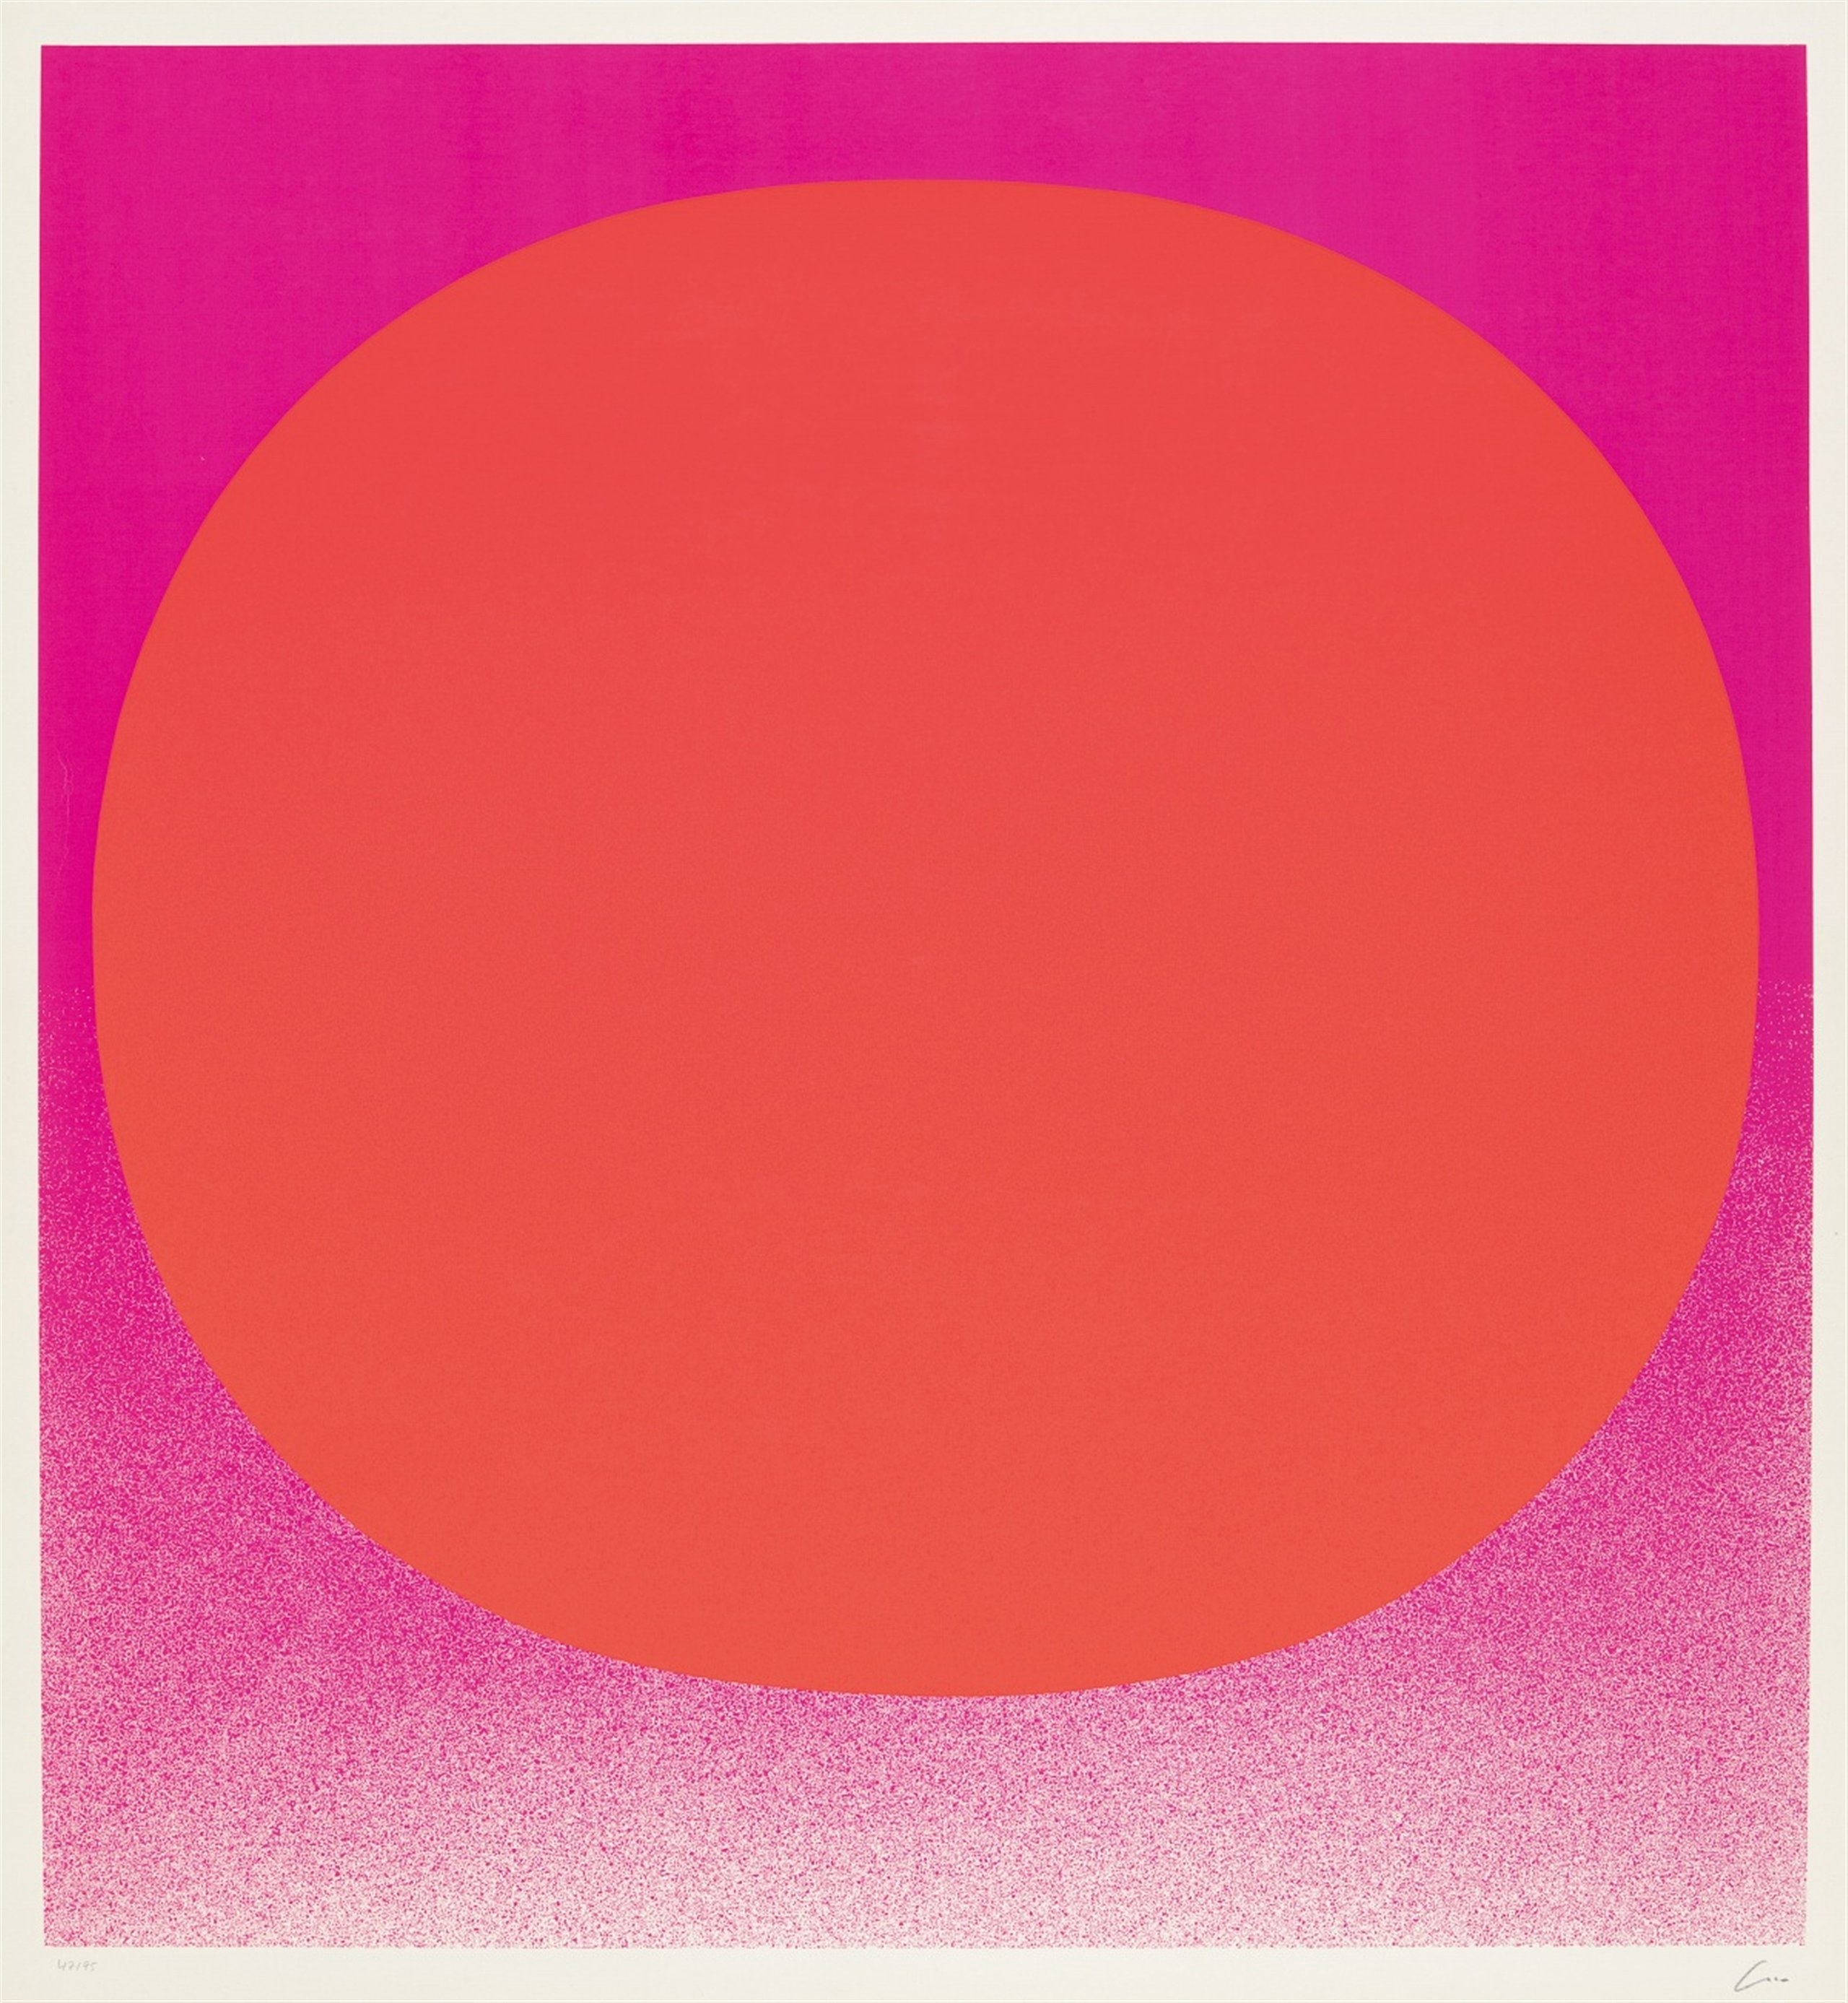 Colour in the round by Rupprecht Geiger, 1969